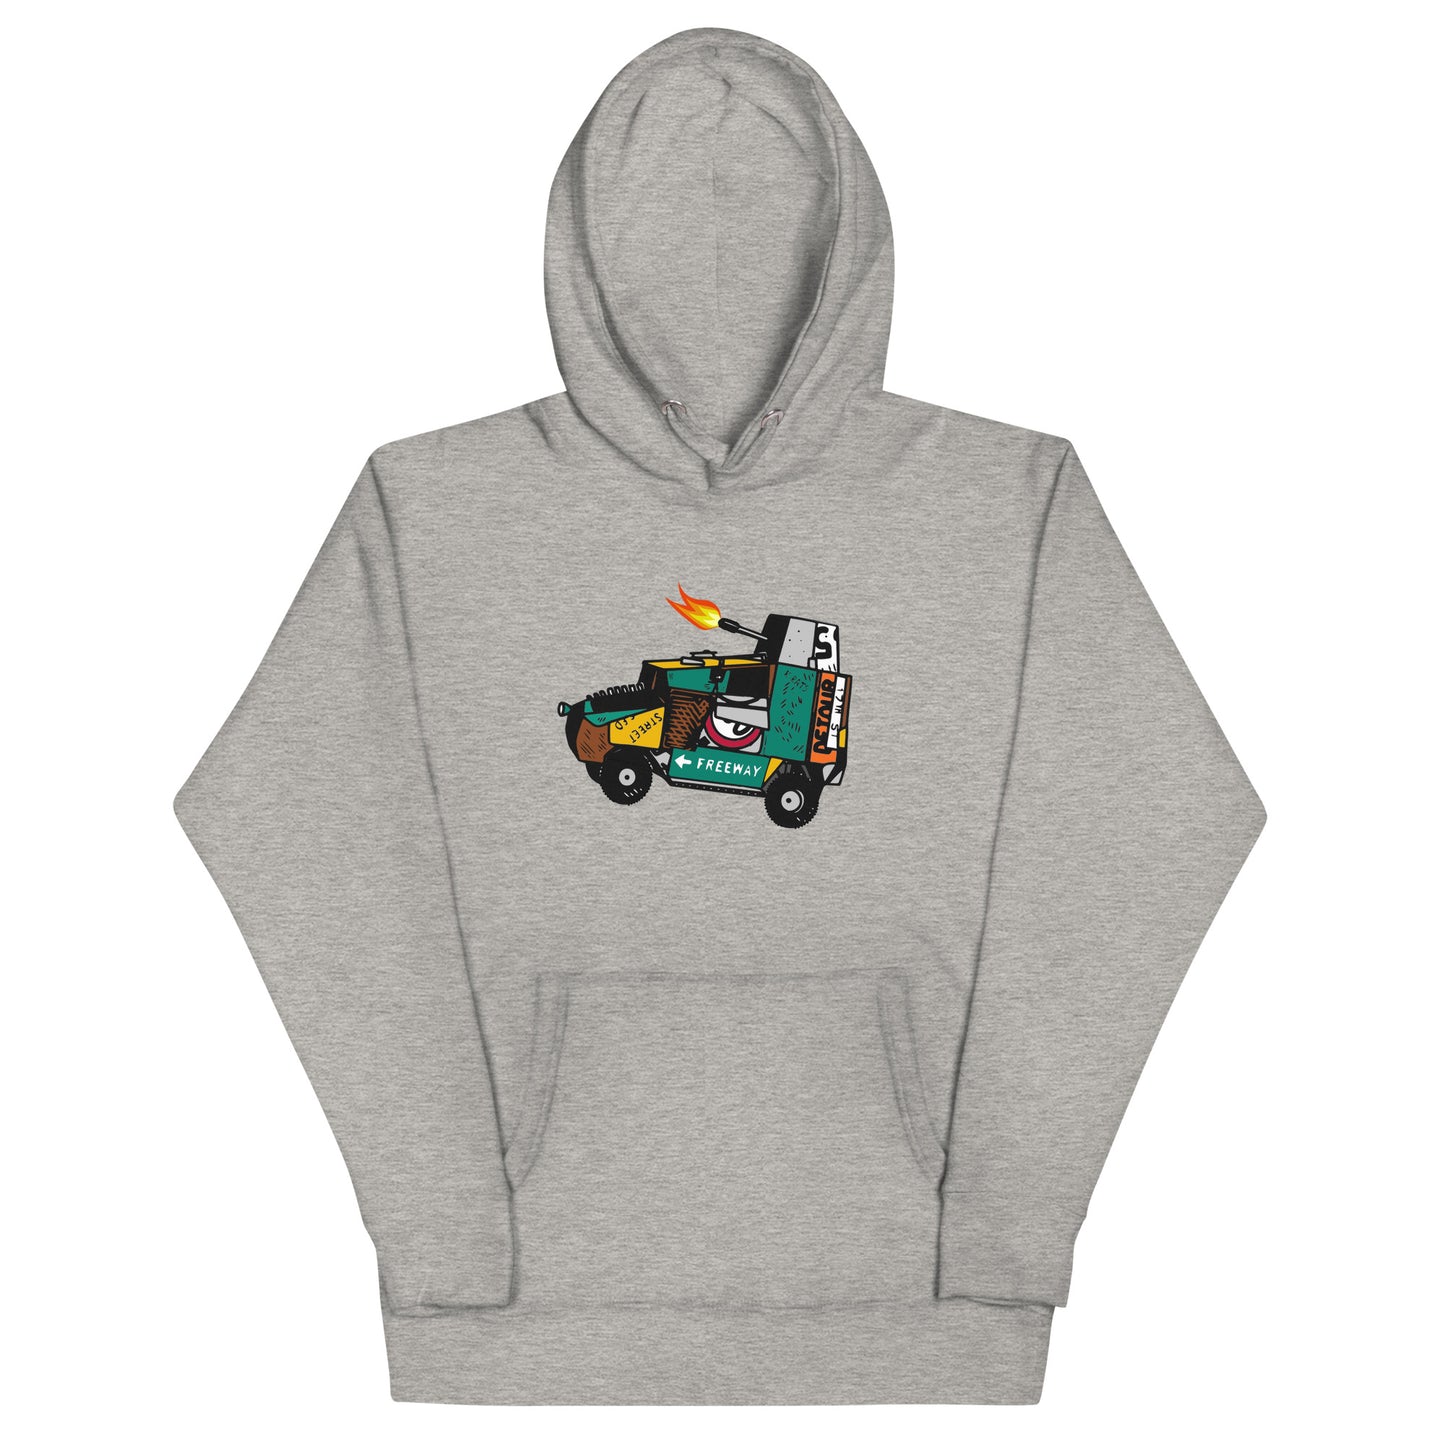 A Kinderpanzer Unisex Hoodie